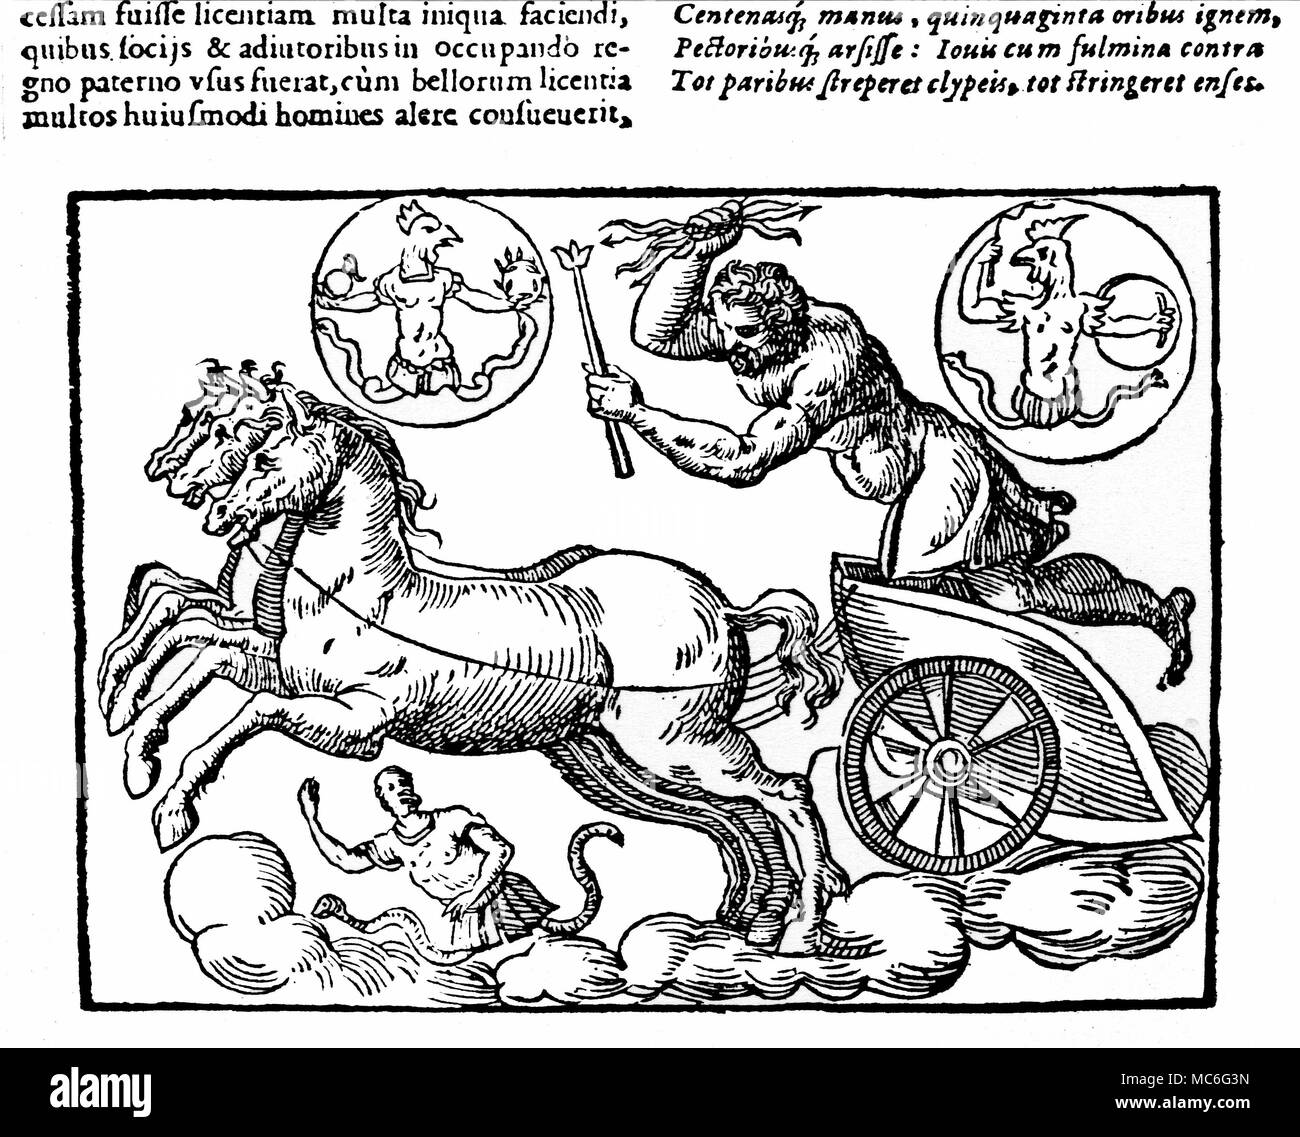 GREEK MYTHOLOGY - ZEUS Zeus, with his horse-drawn chariot, holding in one hand a sceptre (to demonstrate his role as leader of the Gods) and a thunder-bolt, which he tends to use against his enemies on the earth. The two roundels show his connexion with the Gnostic god, Abraxas. Woodcut from a 16th century edition of Natalis Comitis, Mythologiae. Stock Photo